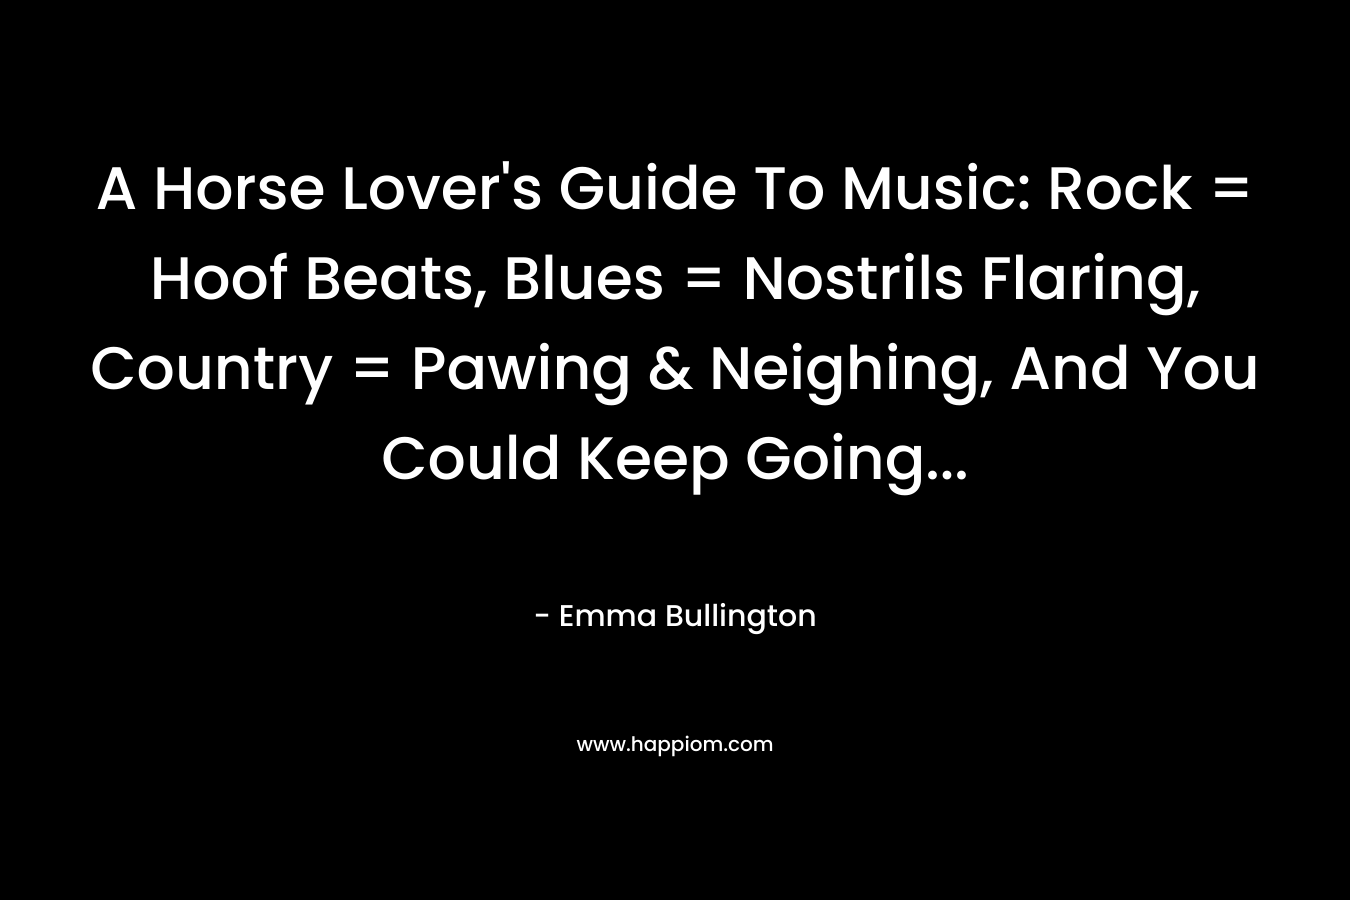 A Horse Lover's Guide To Music: Rock = Hoof Beats, Blues = Nostrils Flaring, Country = Pawing & Neighing, And You Could Keep Going...